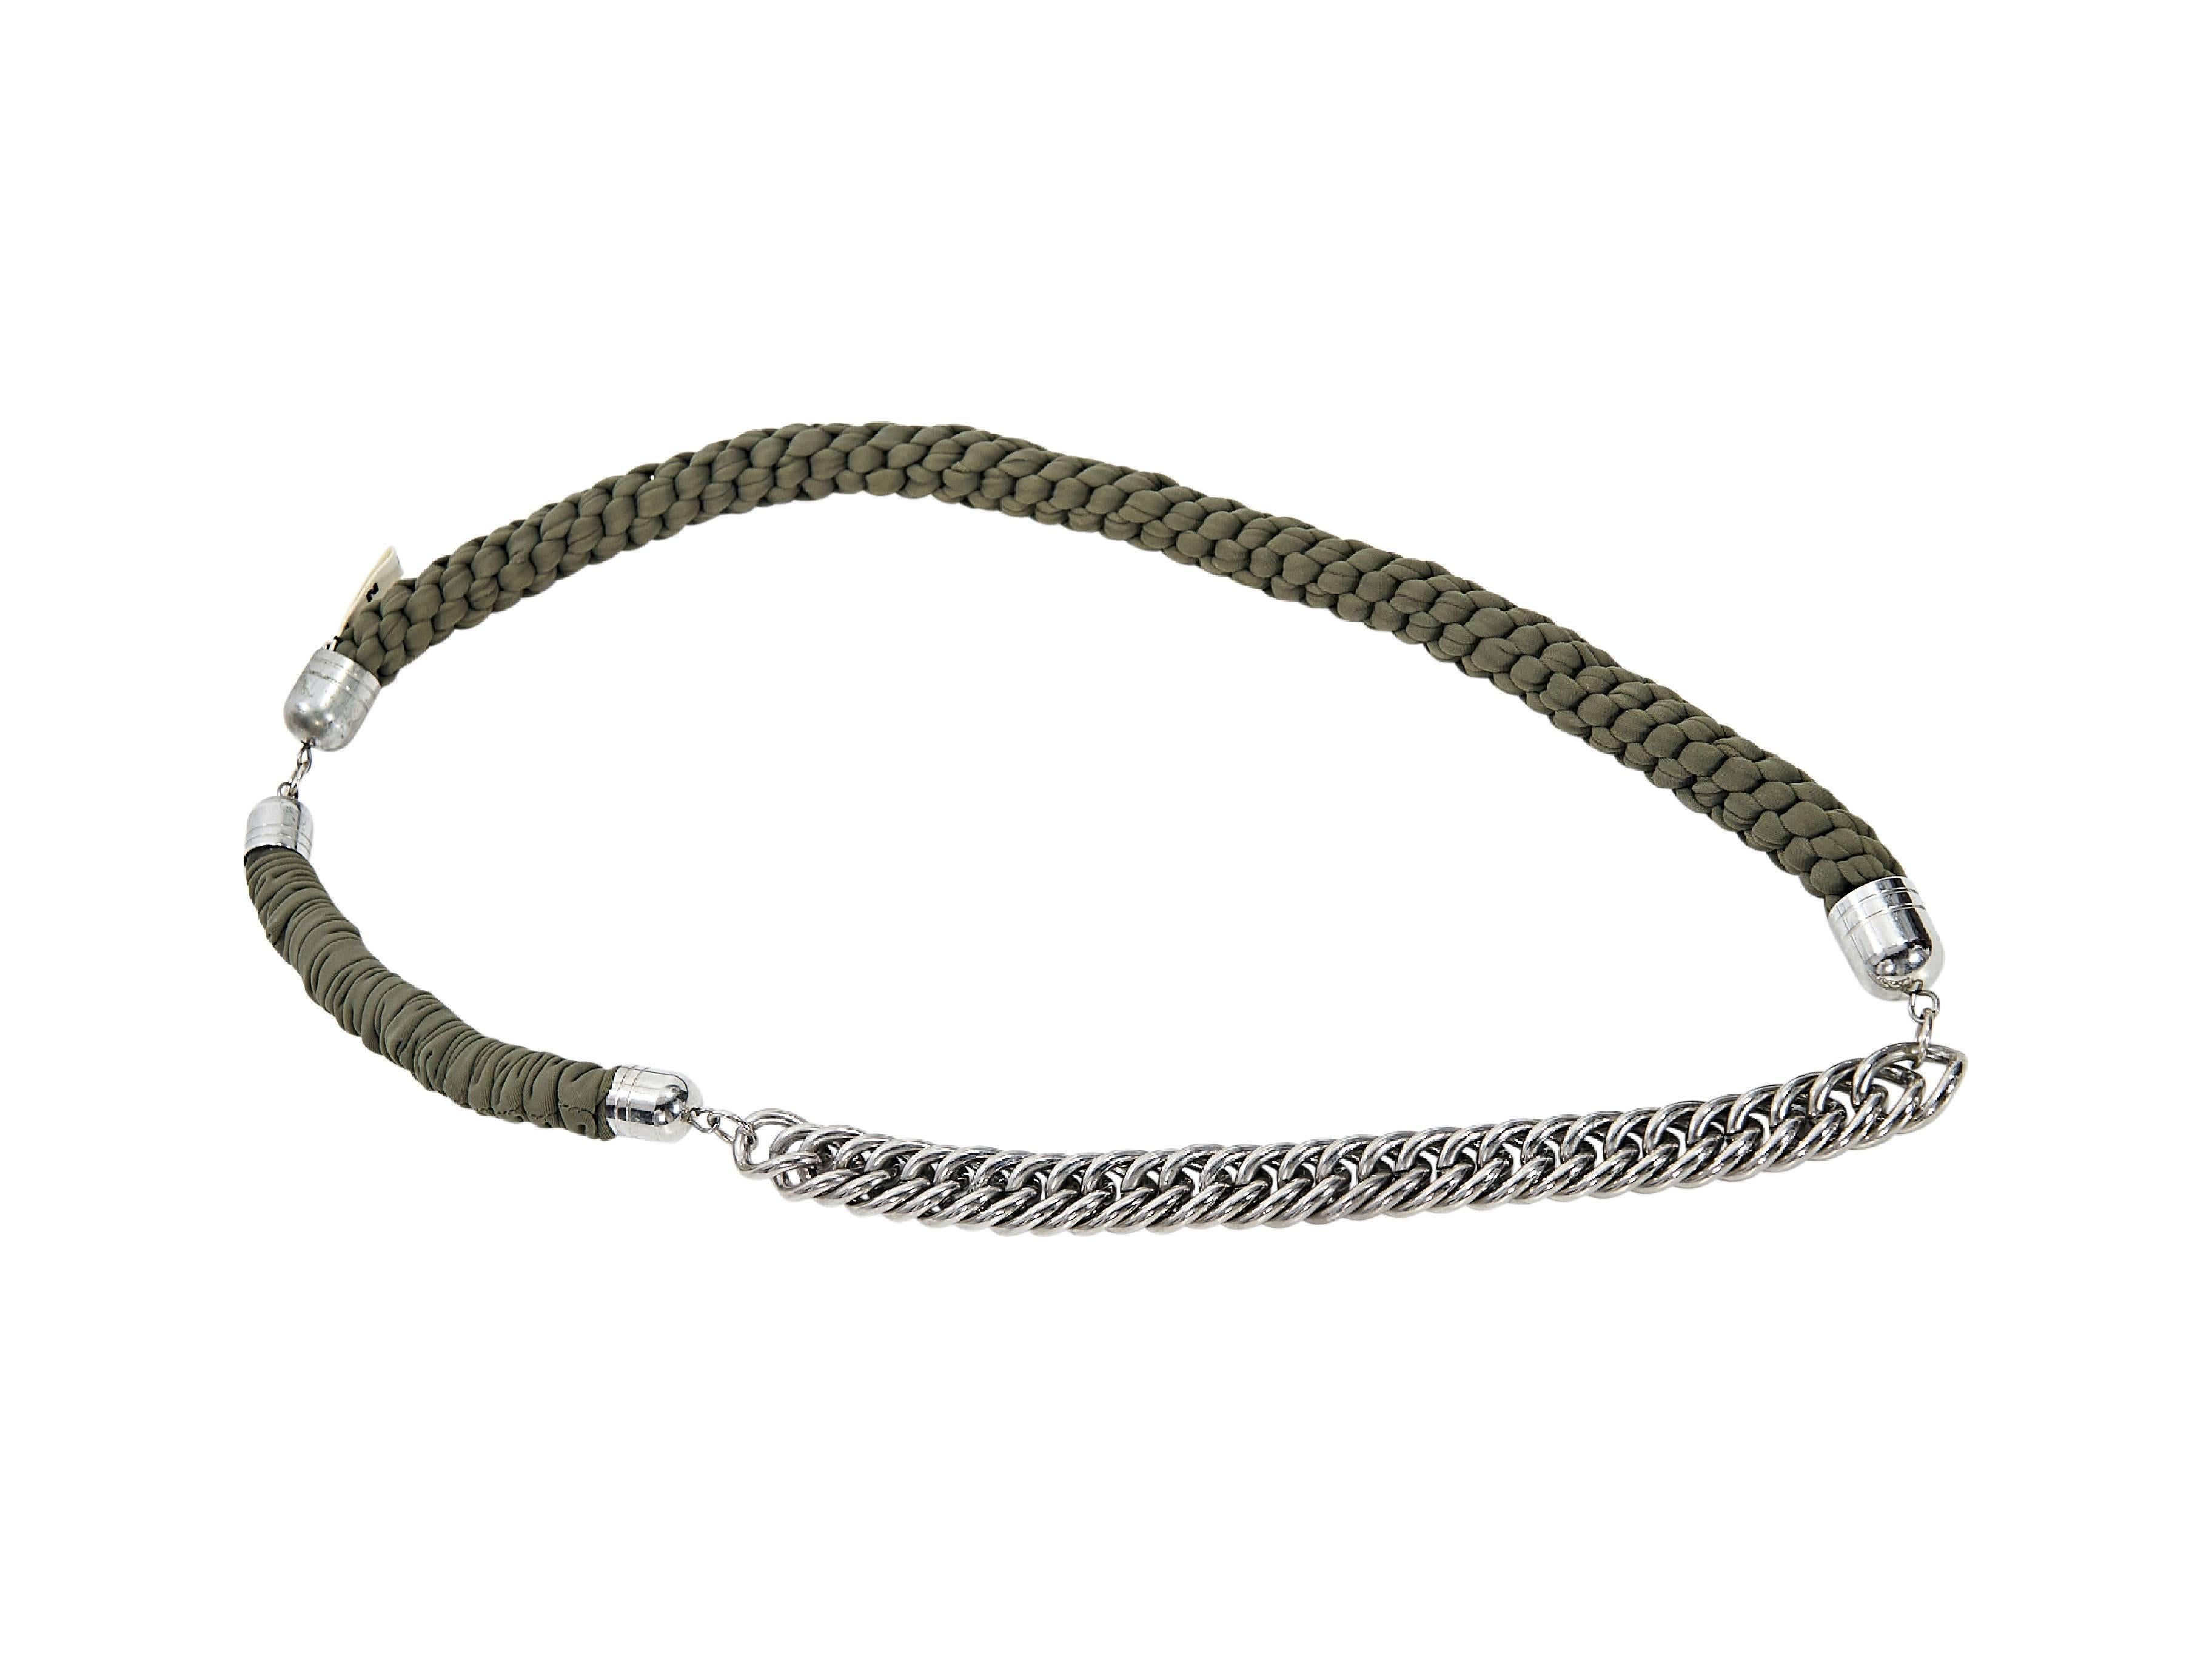 Product details:  Olive green woven and chain necklace by Marni.  Single strand design.  Pullover style.  Silvertone hardware.  31